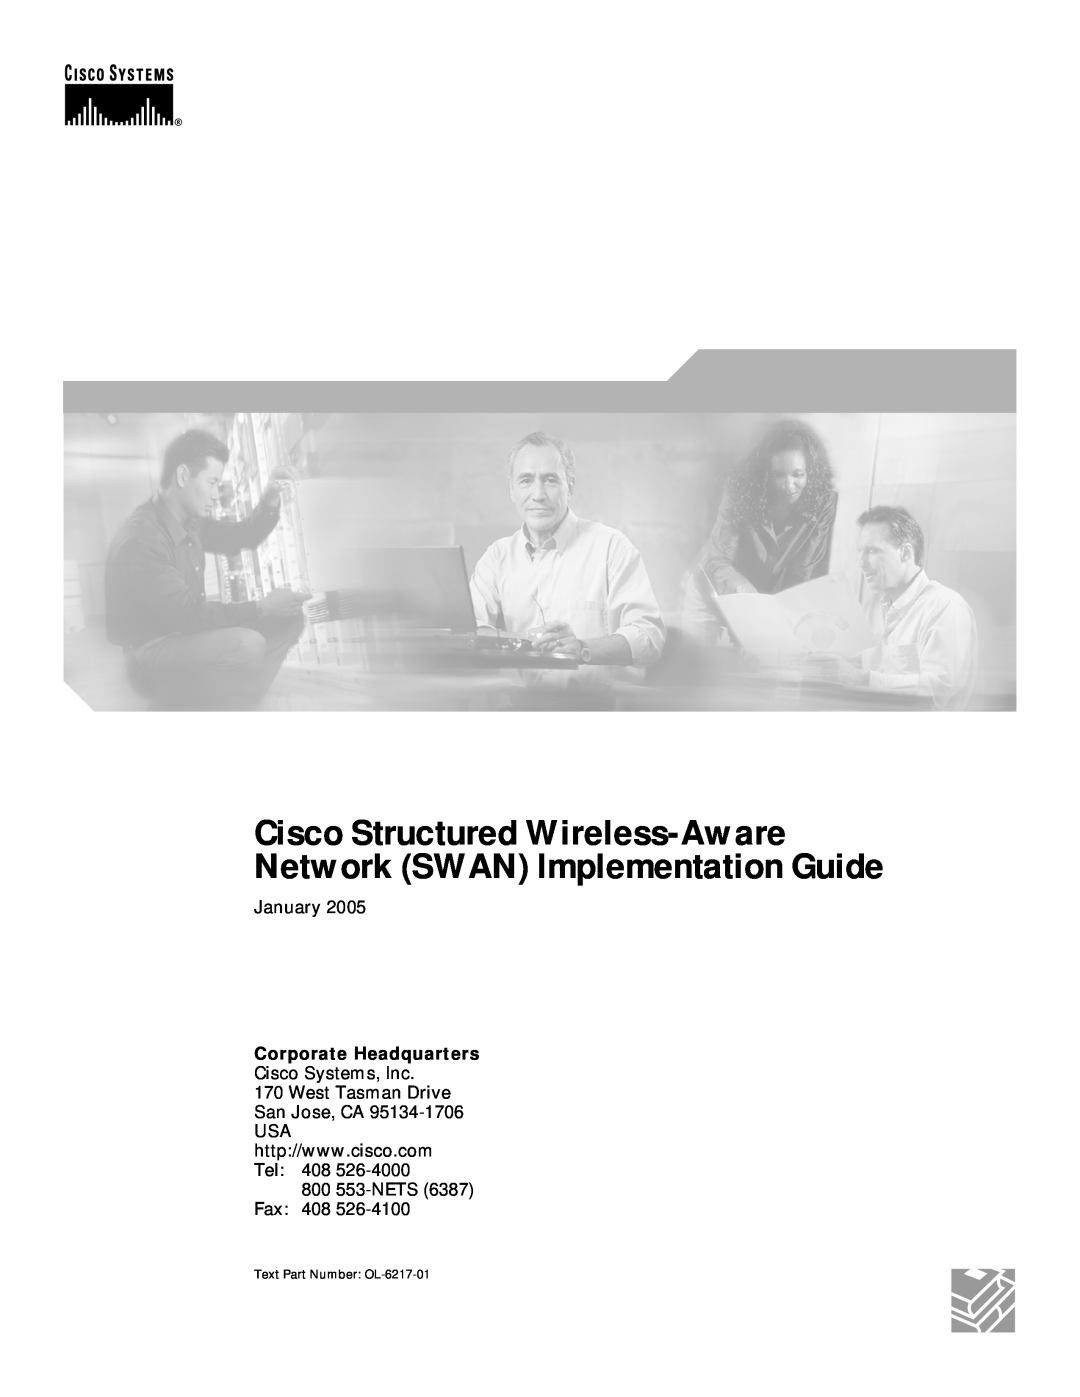 Cisco Systems OL-6217-01 manual Corporate Headquarters, Cisco Structured Wireless-Aware Network SWAN Implementation Guide 